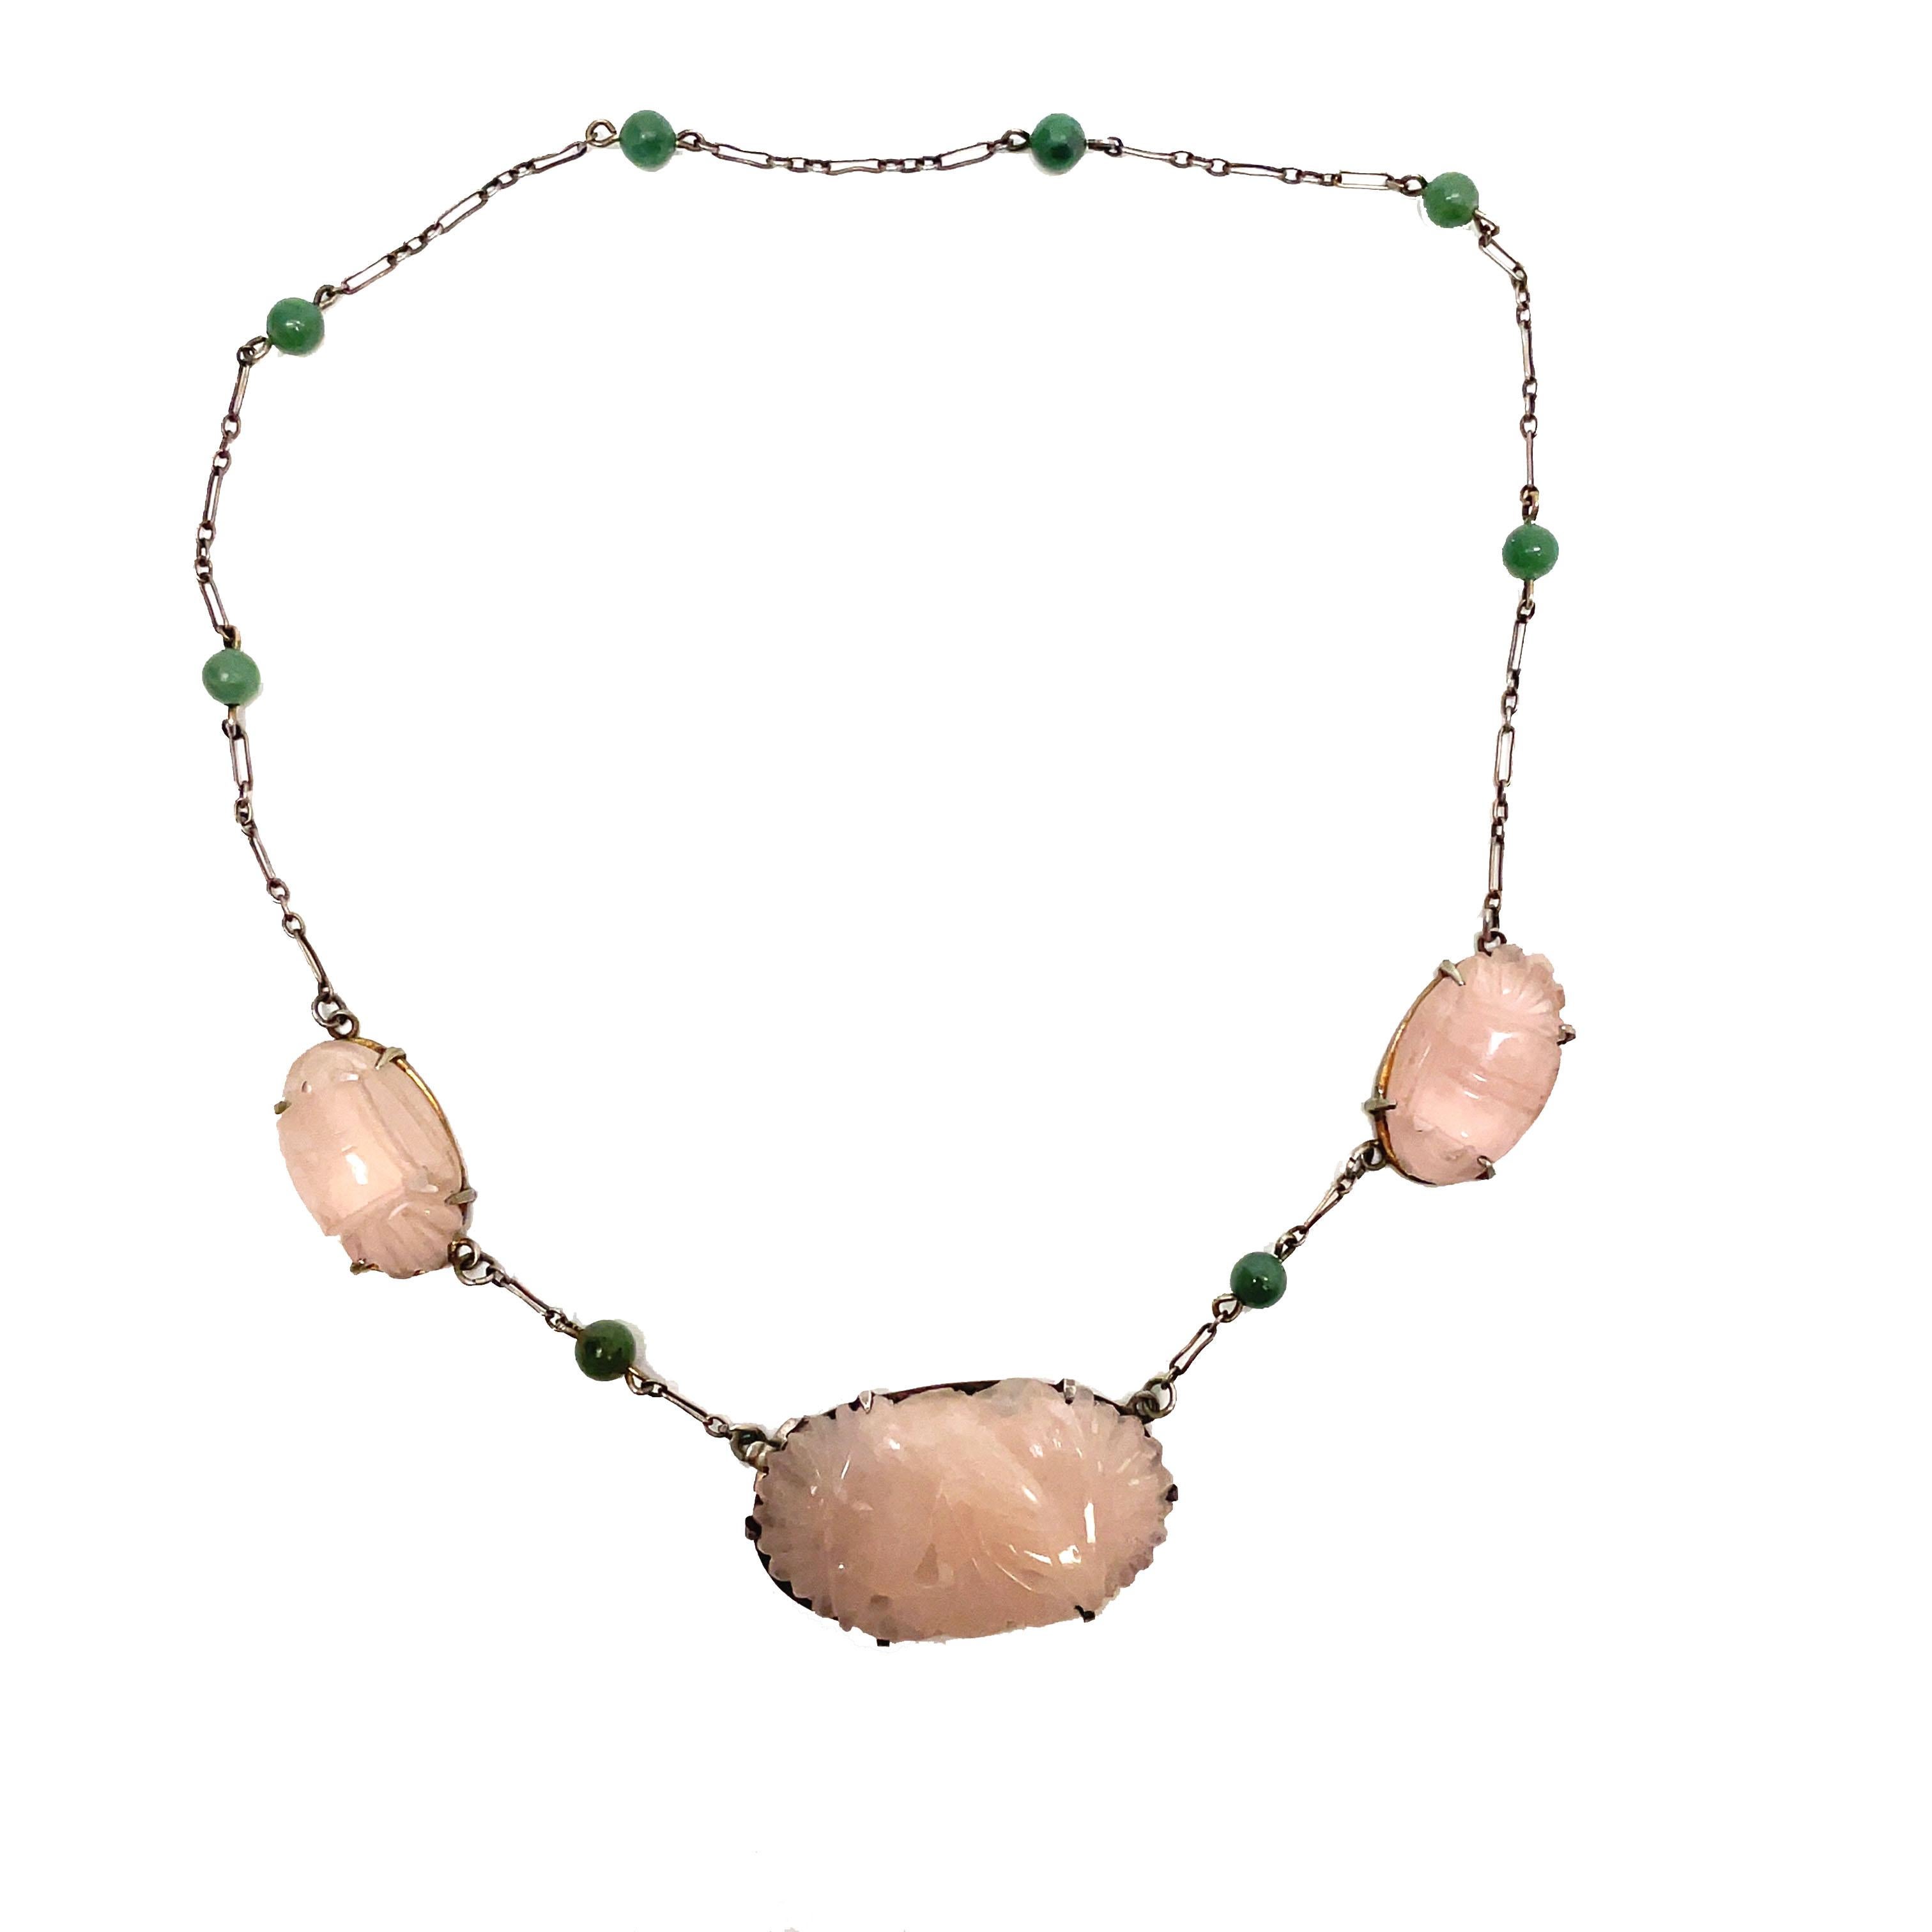 Women's 1920, Deco Sterling Silver Hand Carved Rose Quartz and Jade Bead Necklace